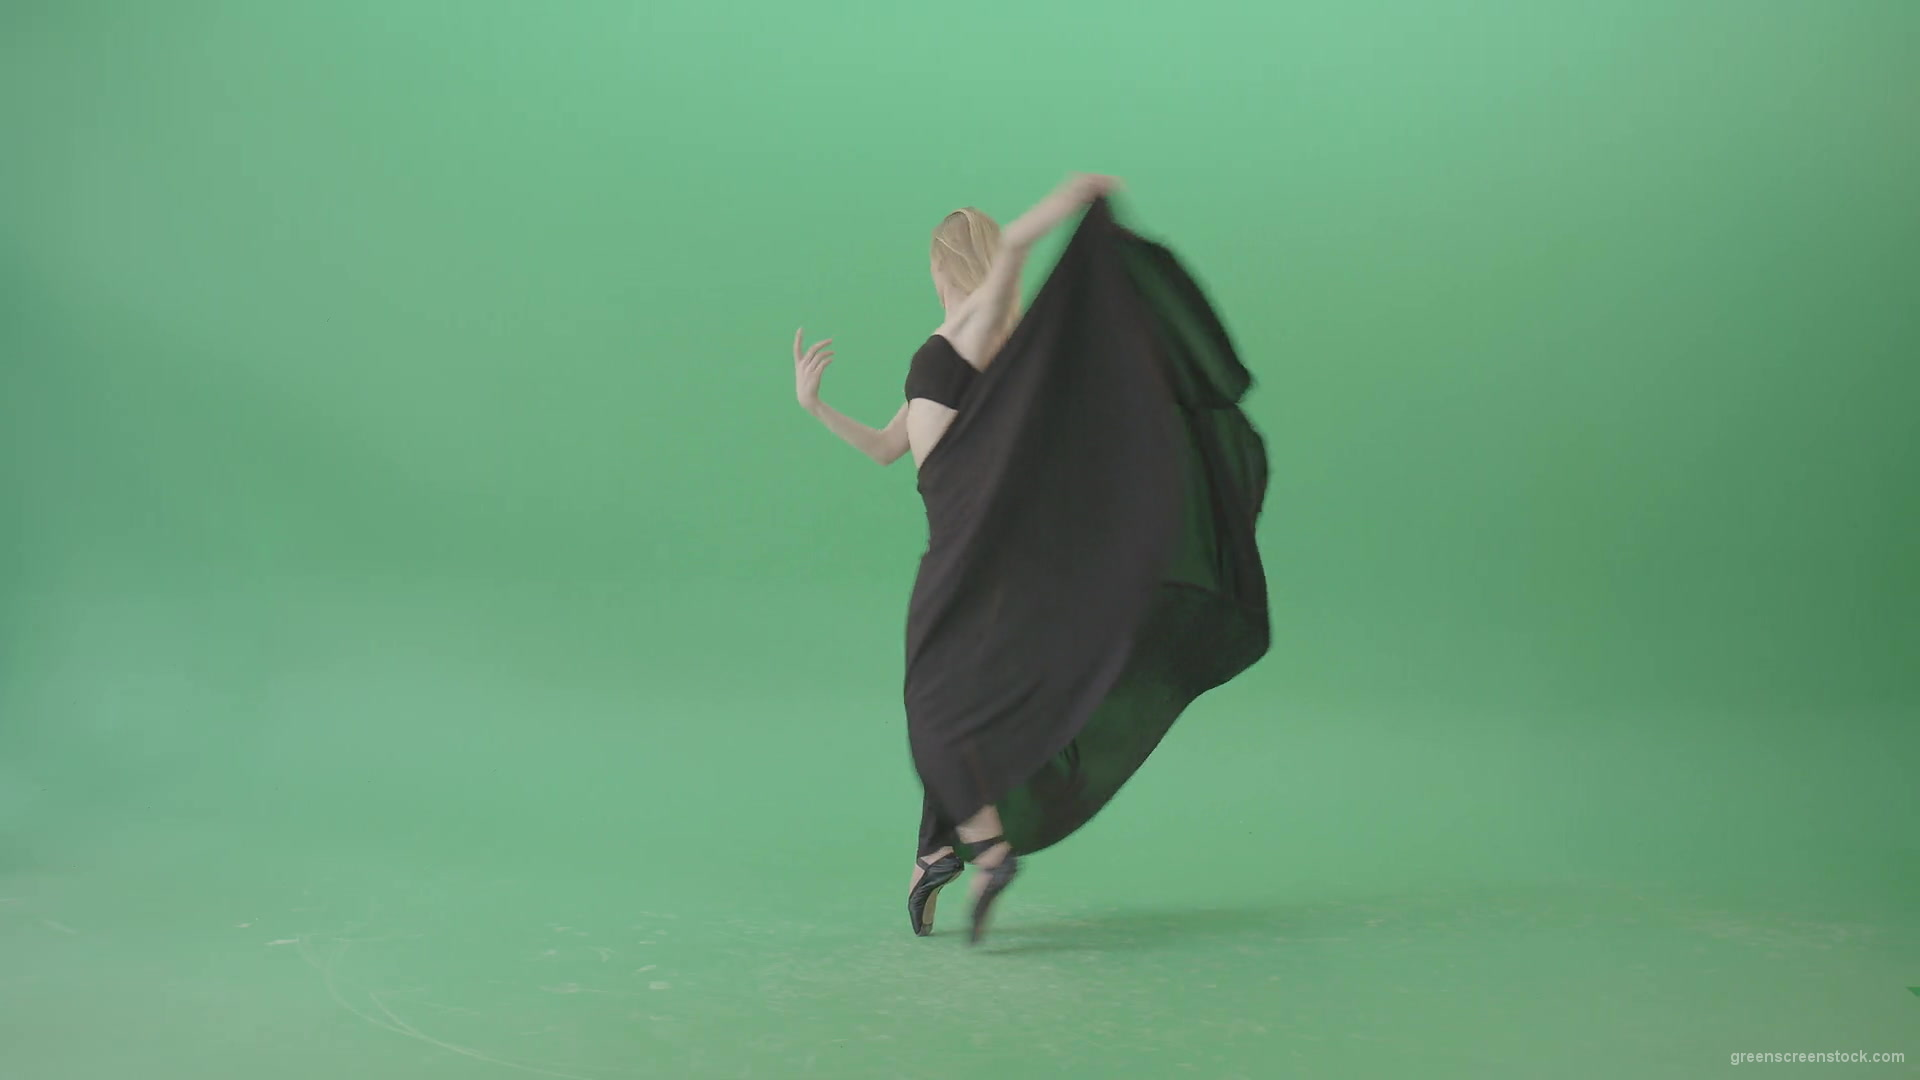 Spinning-isolated-on-green-screen-ballet-young-woman-ballerin-in-black-costume-4K-Video-Footage-1920_002 Green Screen Stock